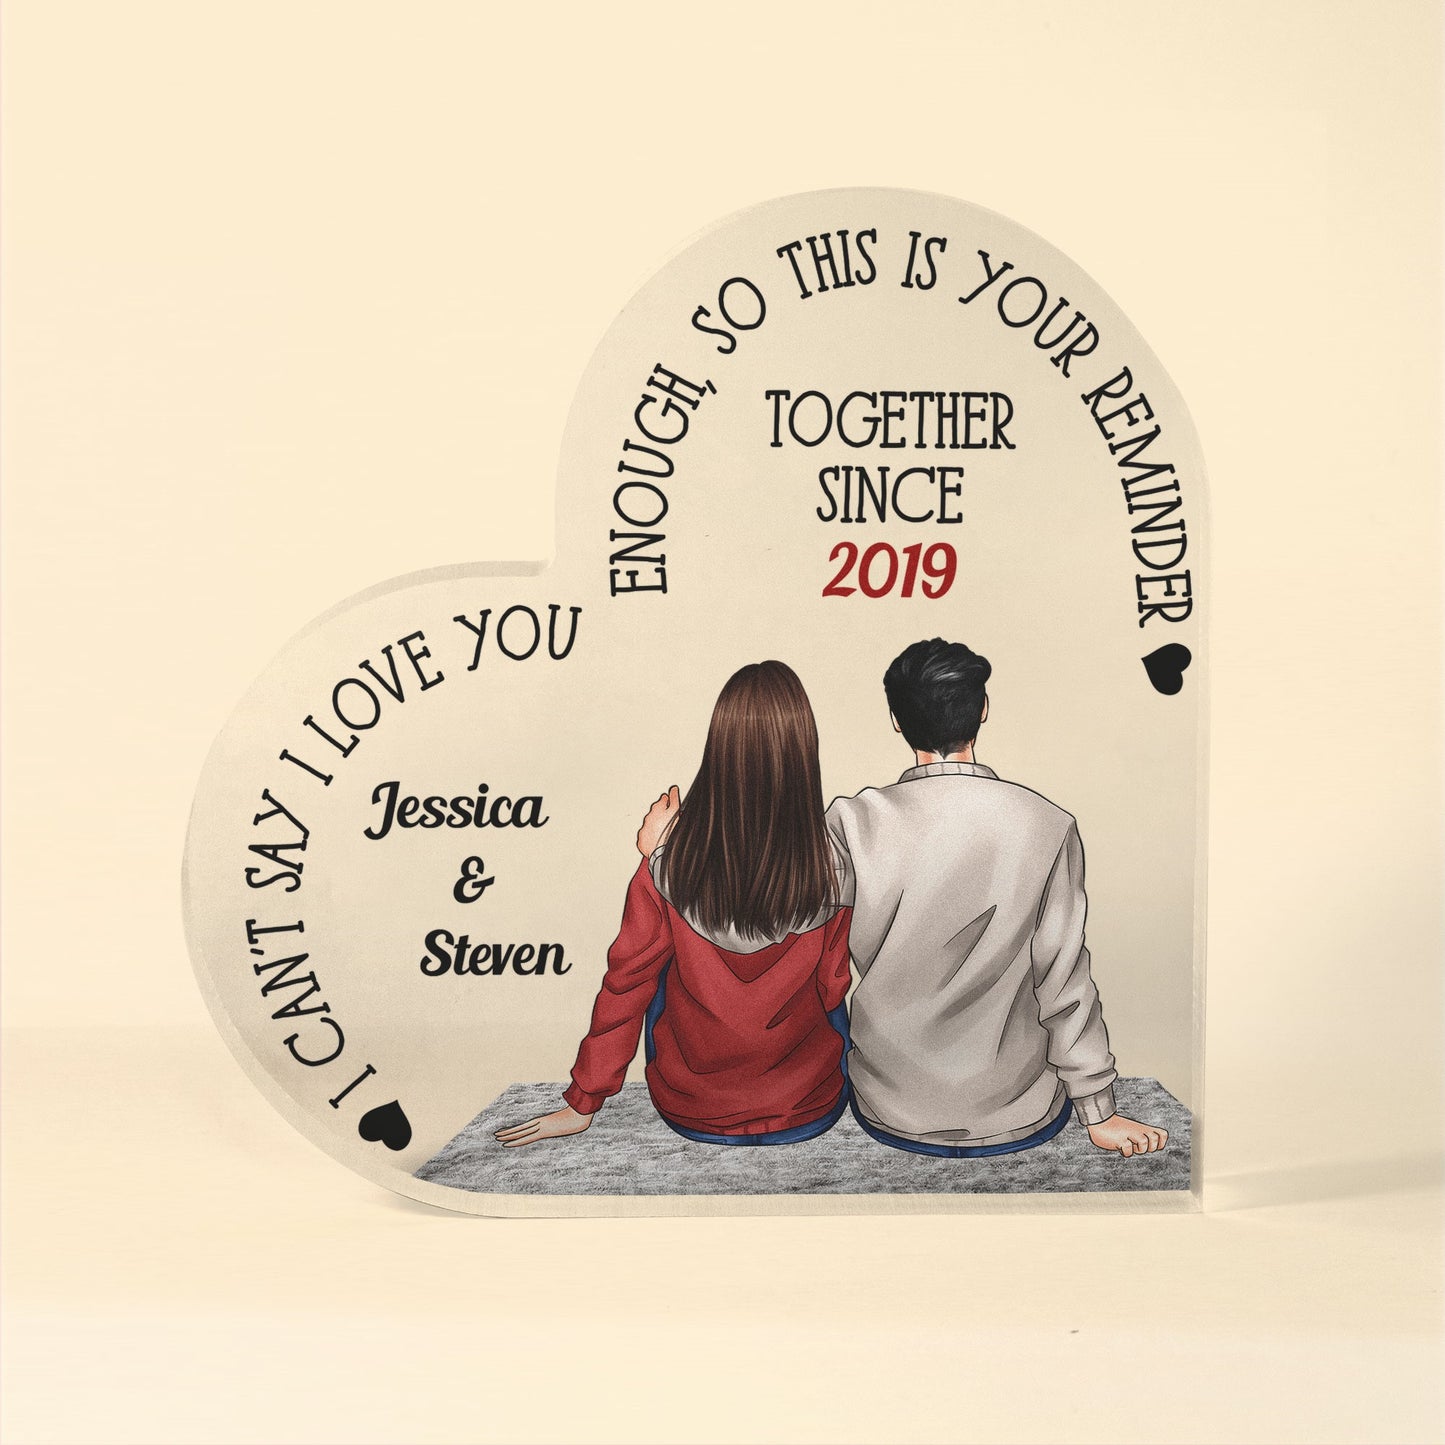 I Can't Say I Love You Enough, So This Is Your Reminder - Personalized Heart Shaped Acrylic Plaque - Birthday, Loving, Valentine Gift For Couple, Boyfriend, Girlfriend, Husband, Wife